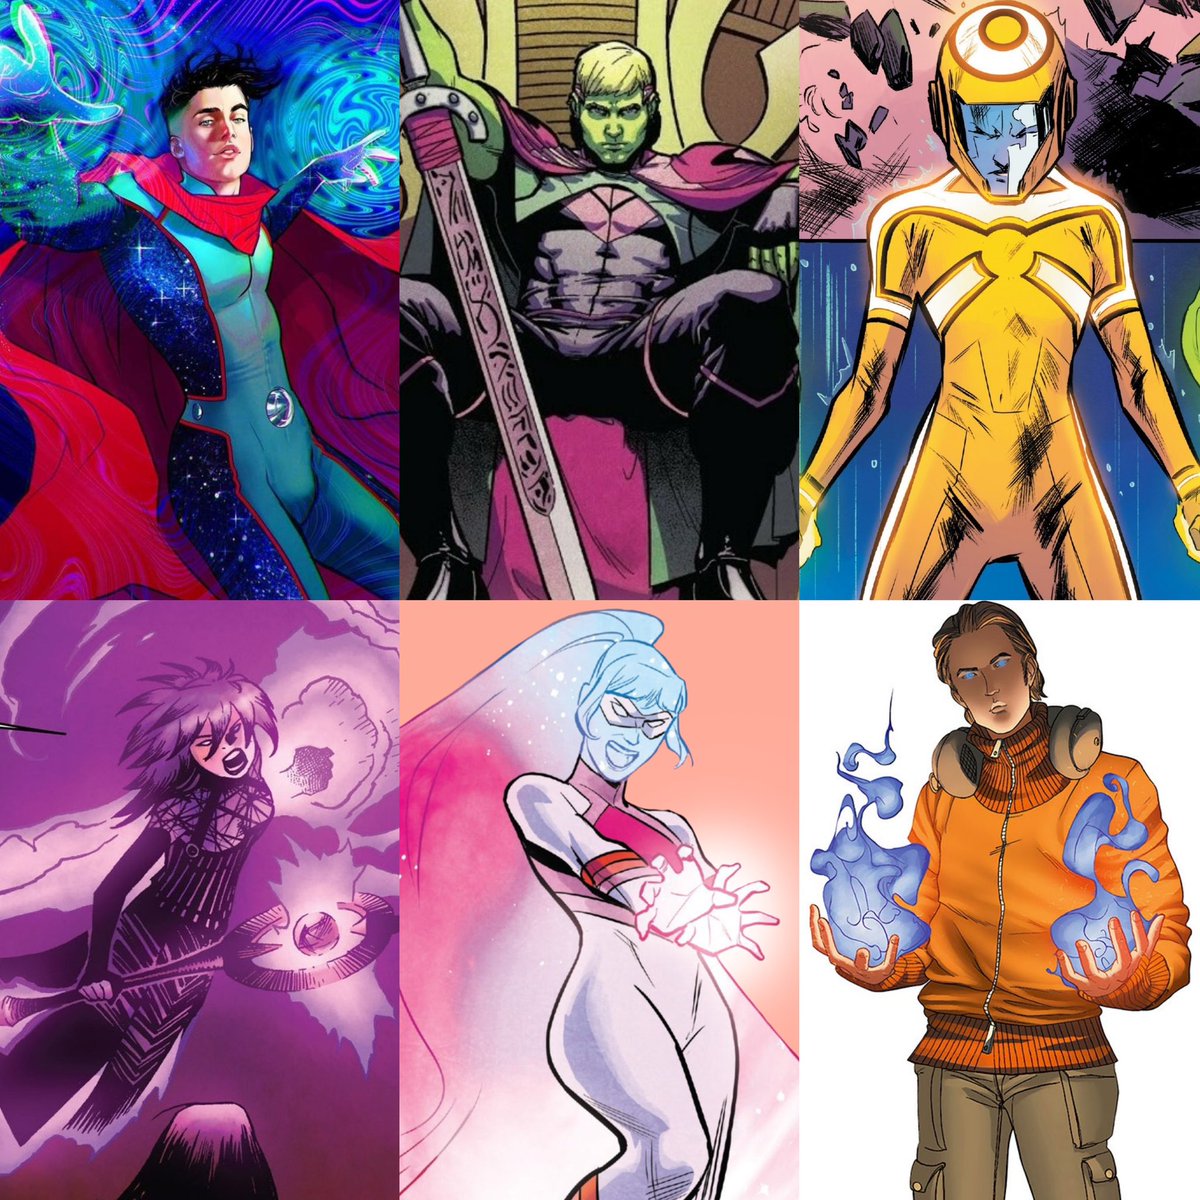 Is it too much to ask for a team up with these 6 in the future?